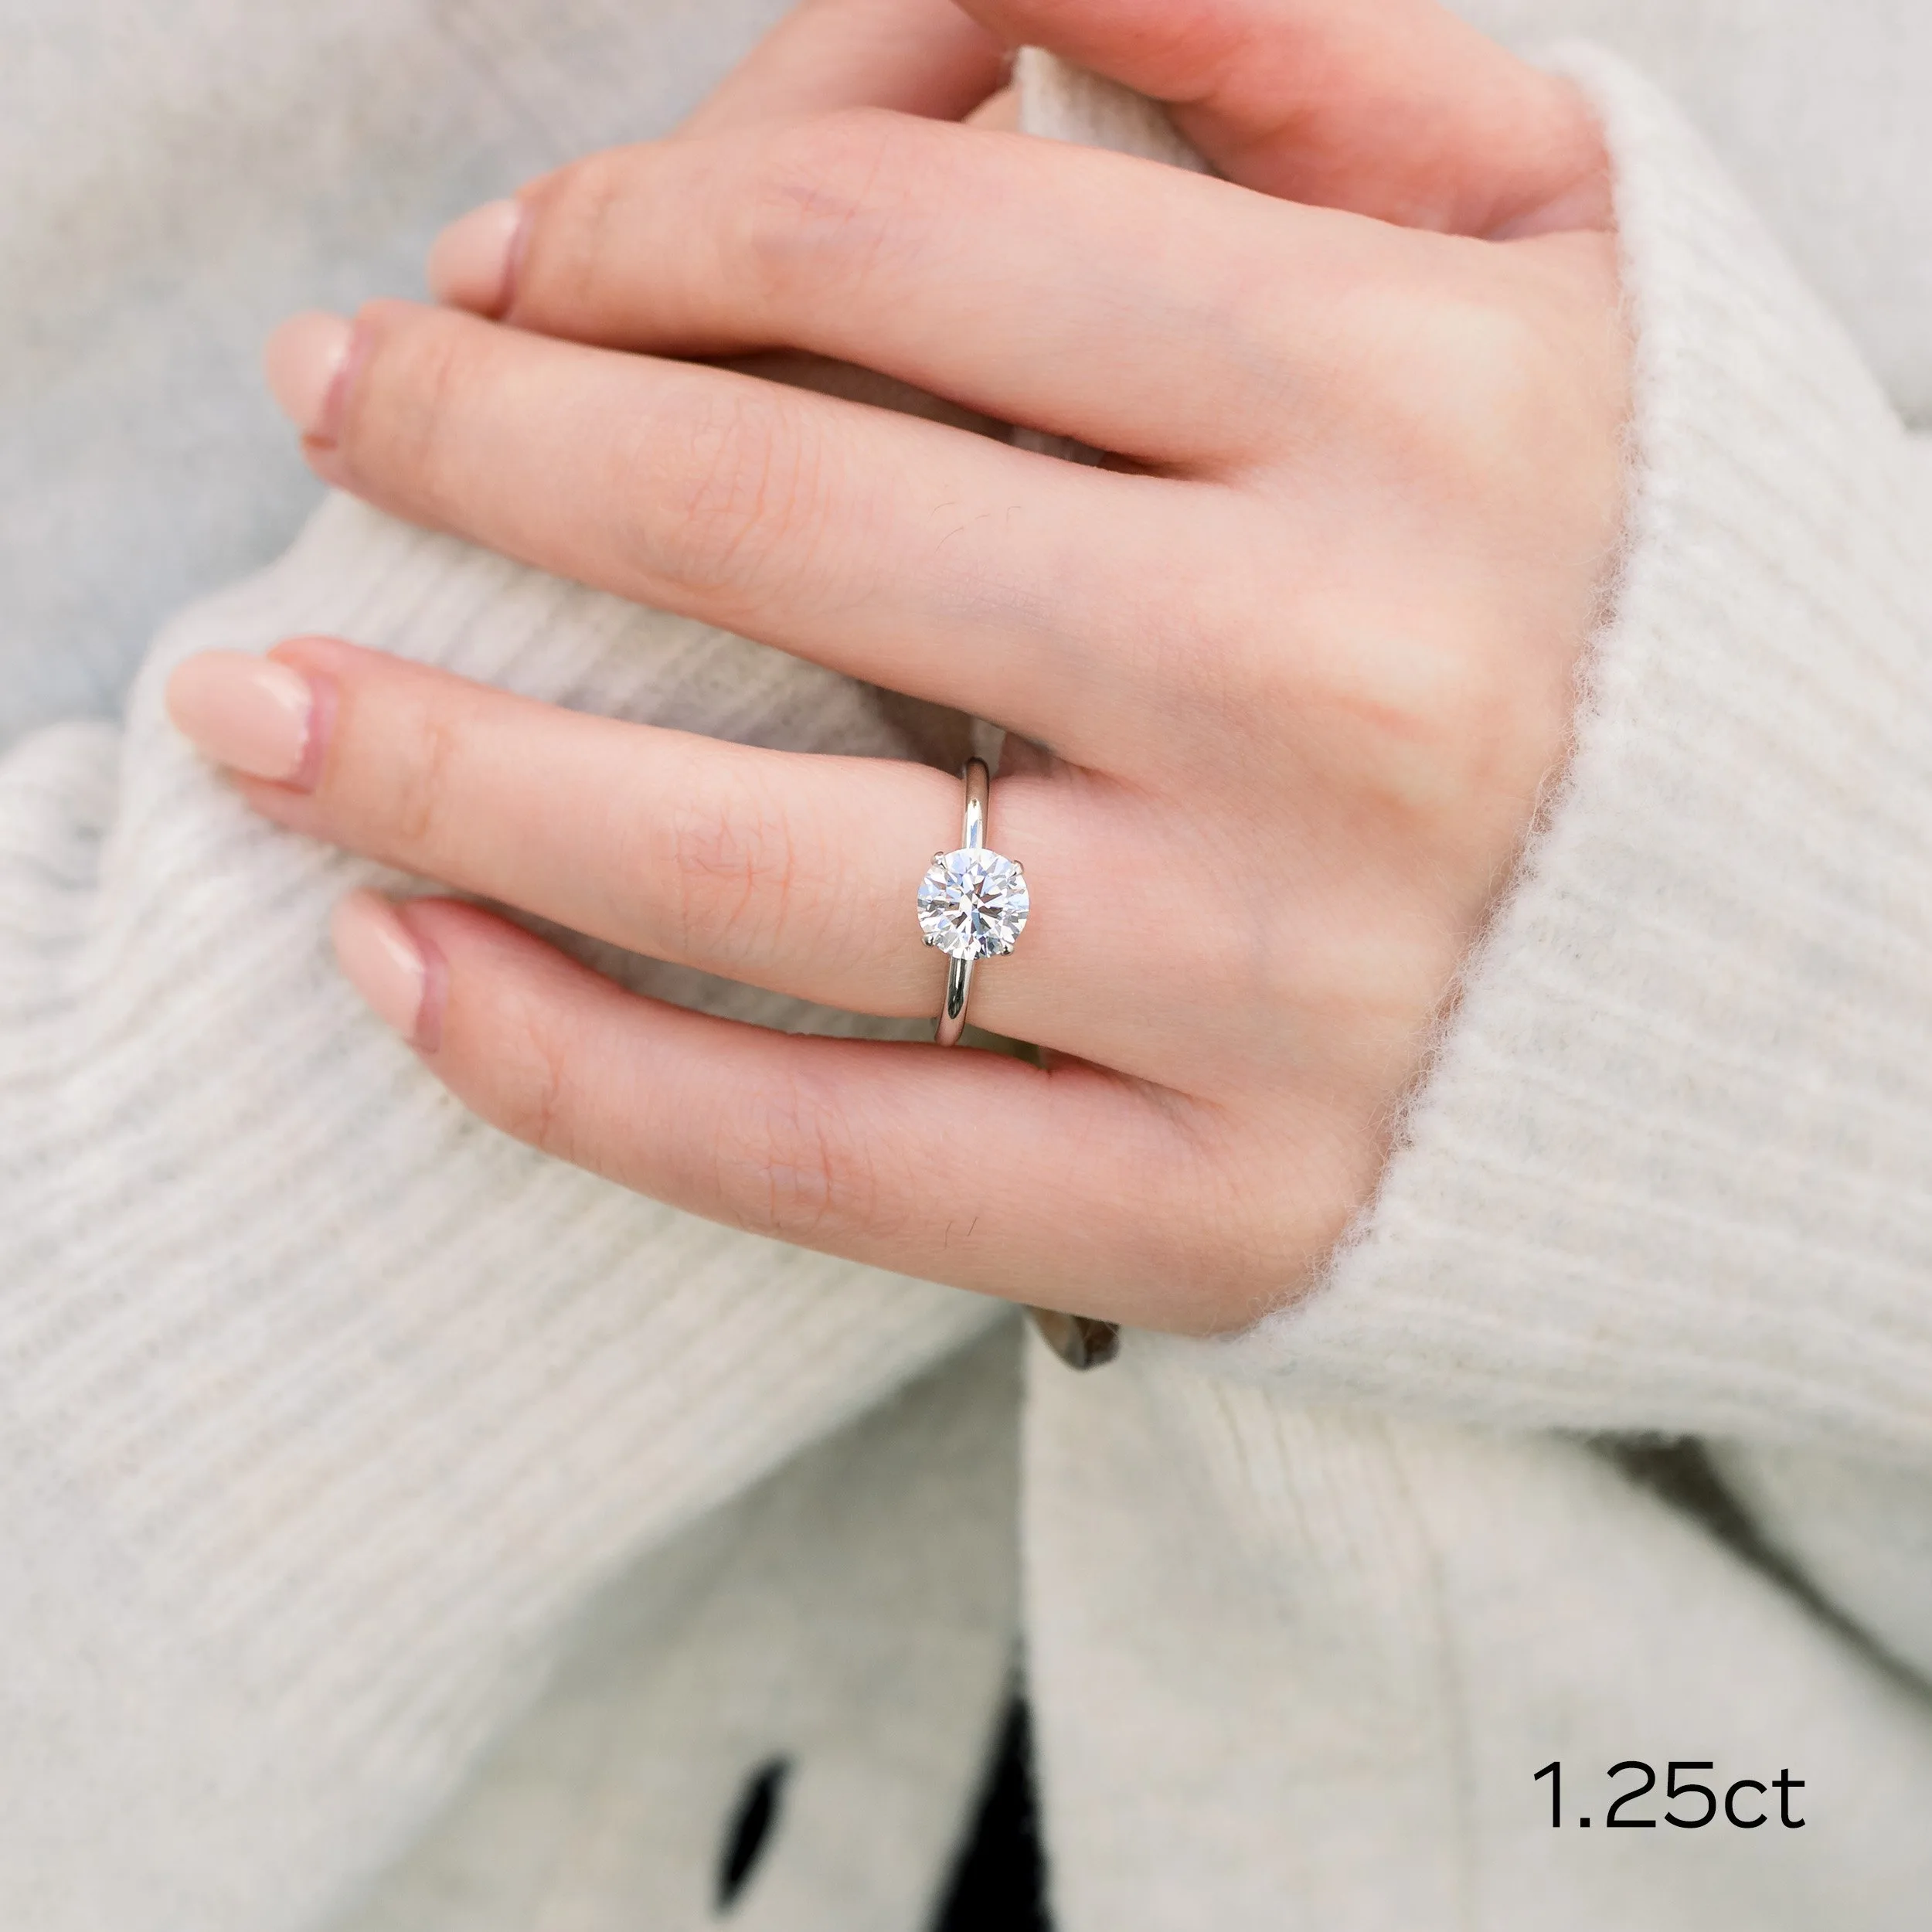 White Gold 1.25 Carat Round Brilliant Solitaire Engagement Ring Feat. Lab Grown Diamonds Ada Diamonds Design Number AD-144 on Model Shot